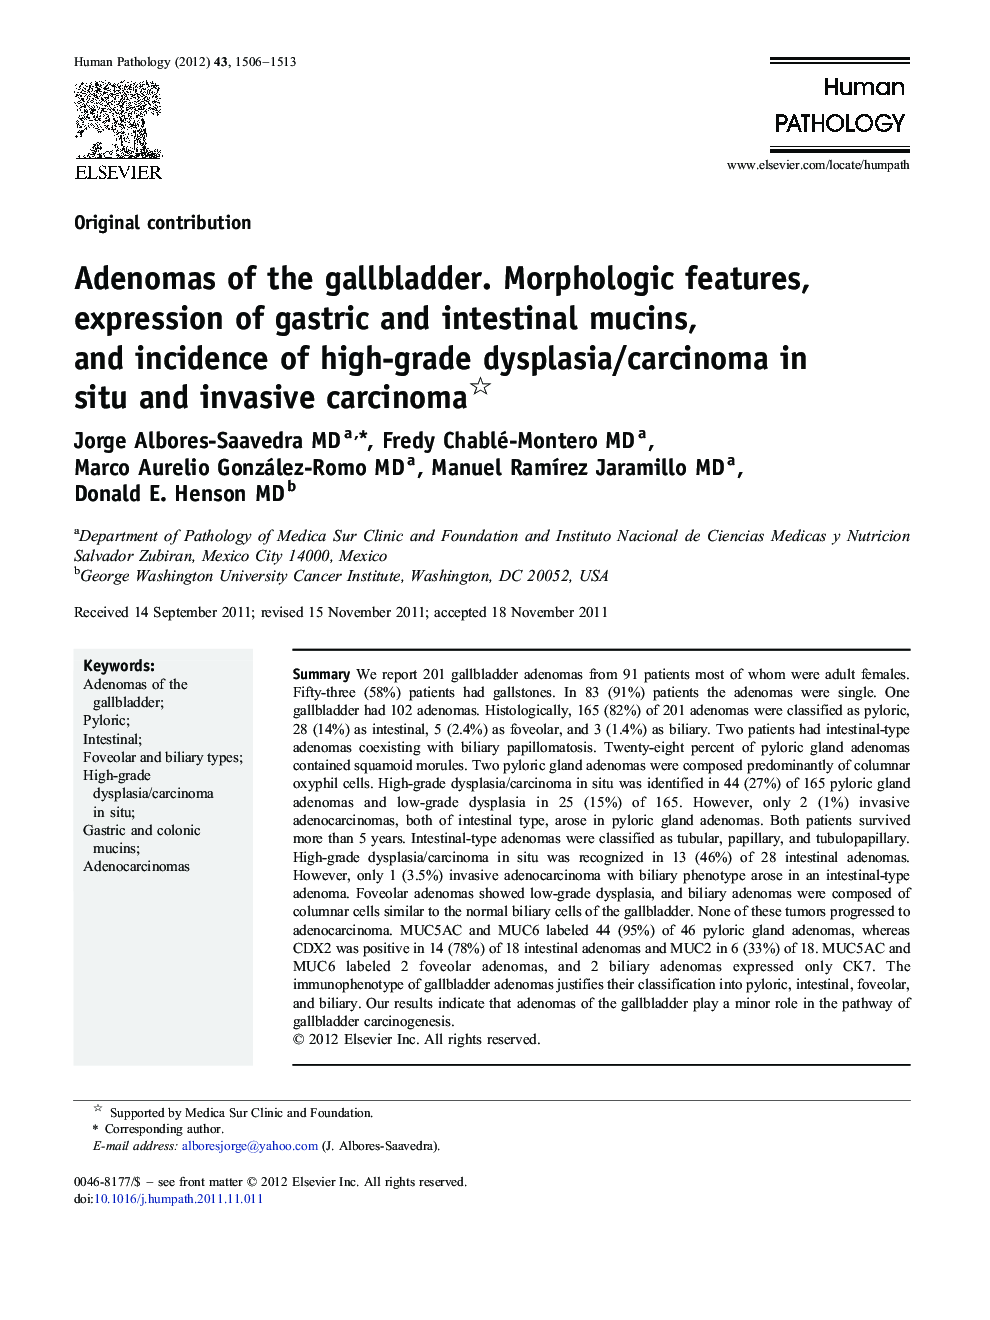 Adenomas of the gallbladder. Morphologic features, expression of gastric and intestinal mucins, and incidence of high-grade dysplasia/carcinoma in situ and invasive carcinoma 